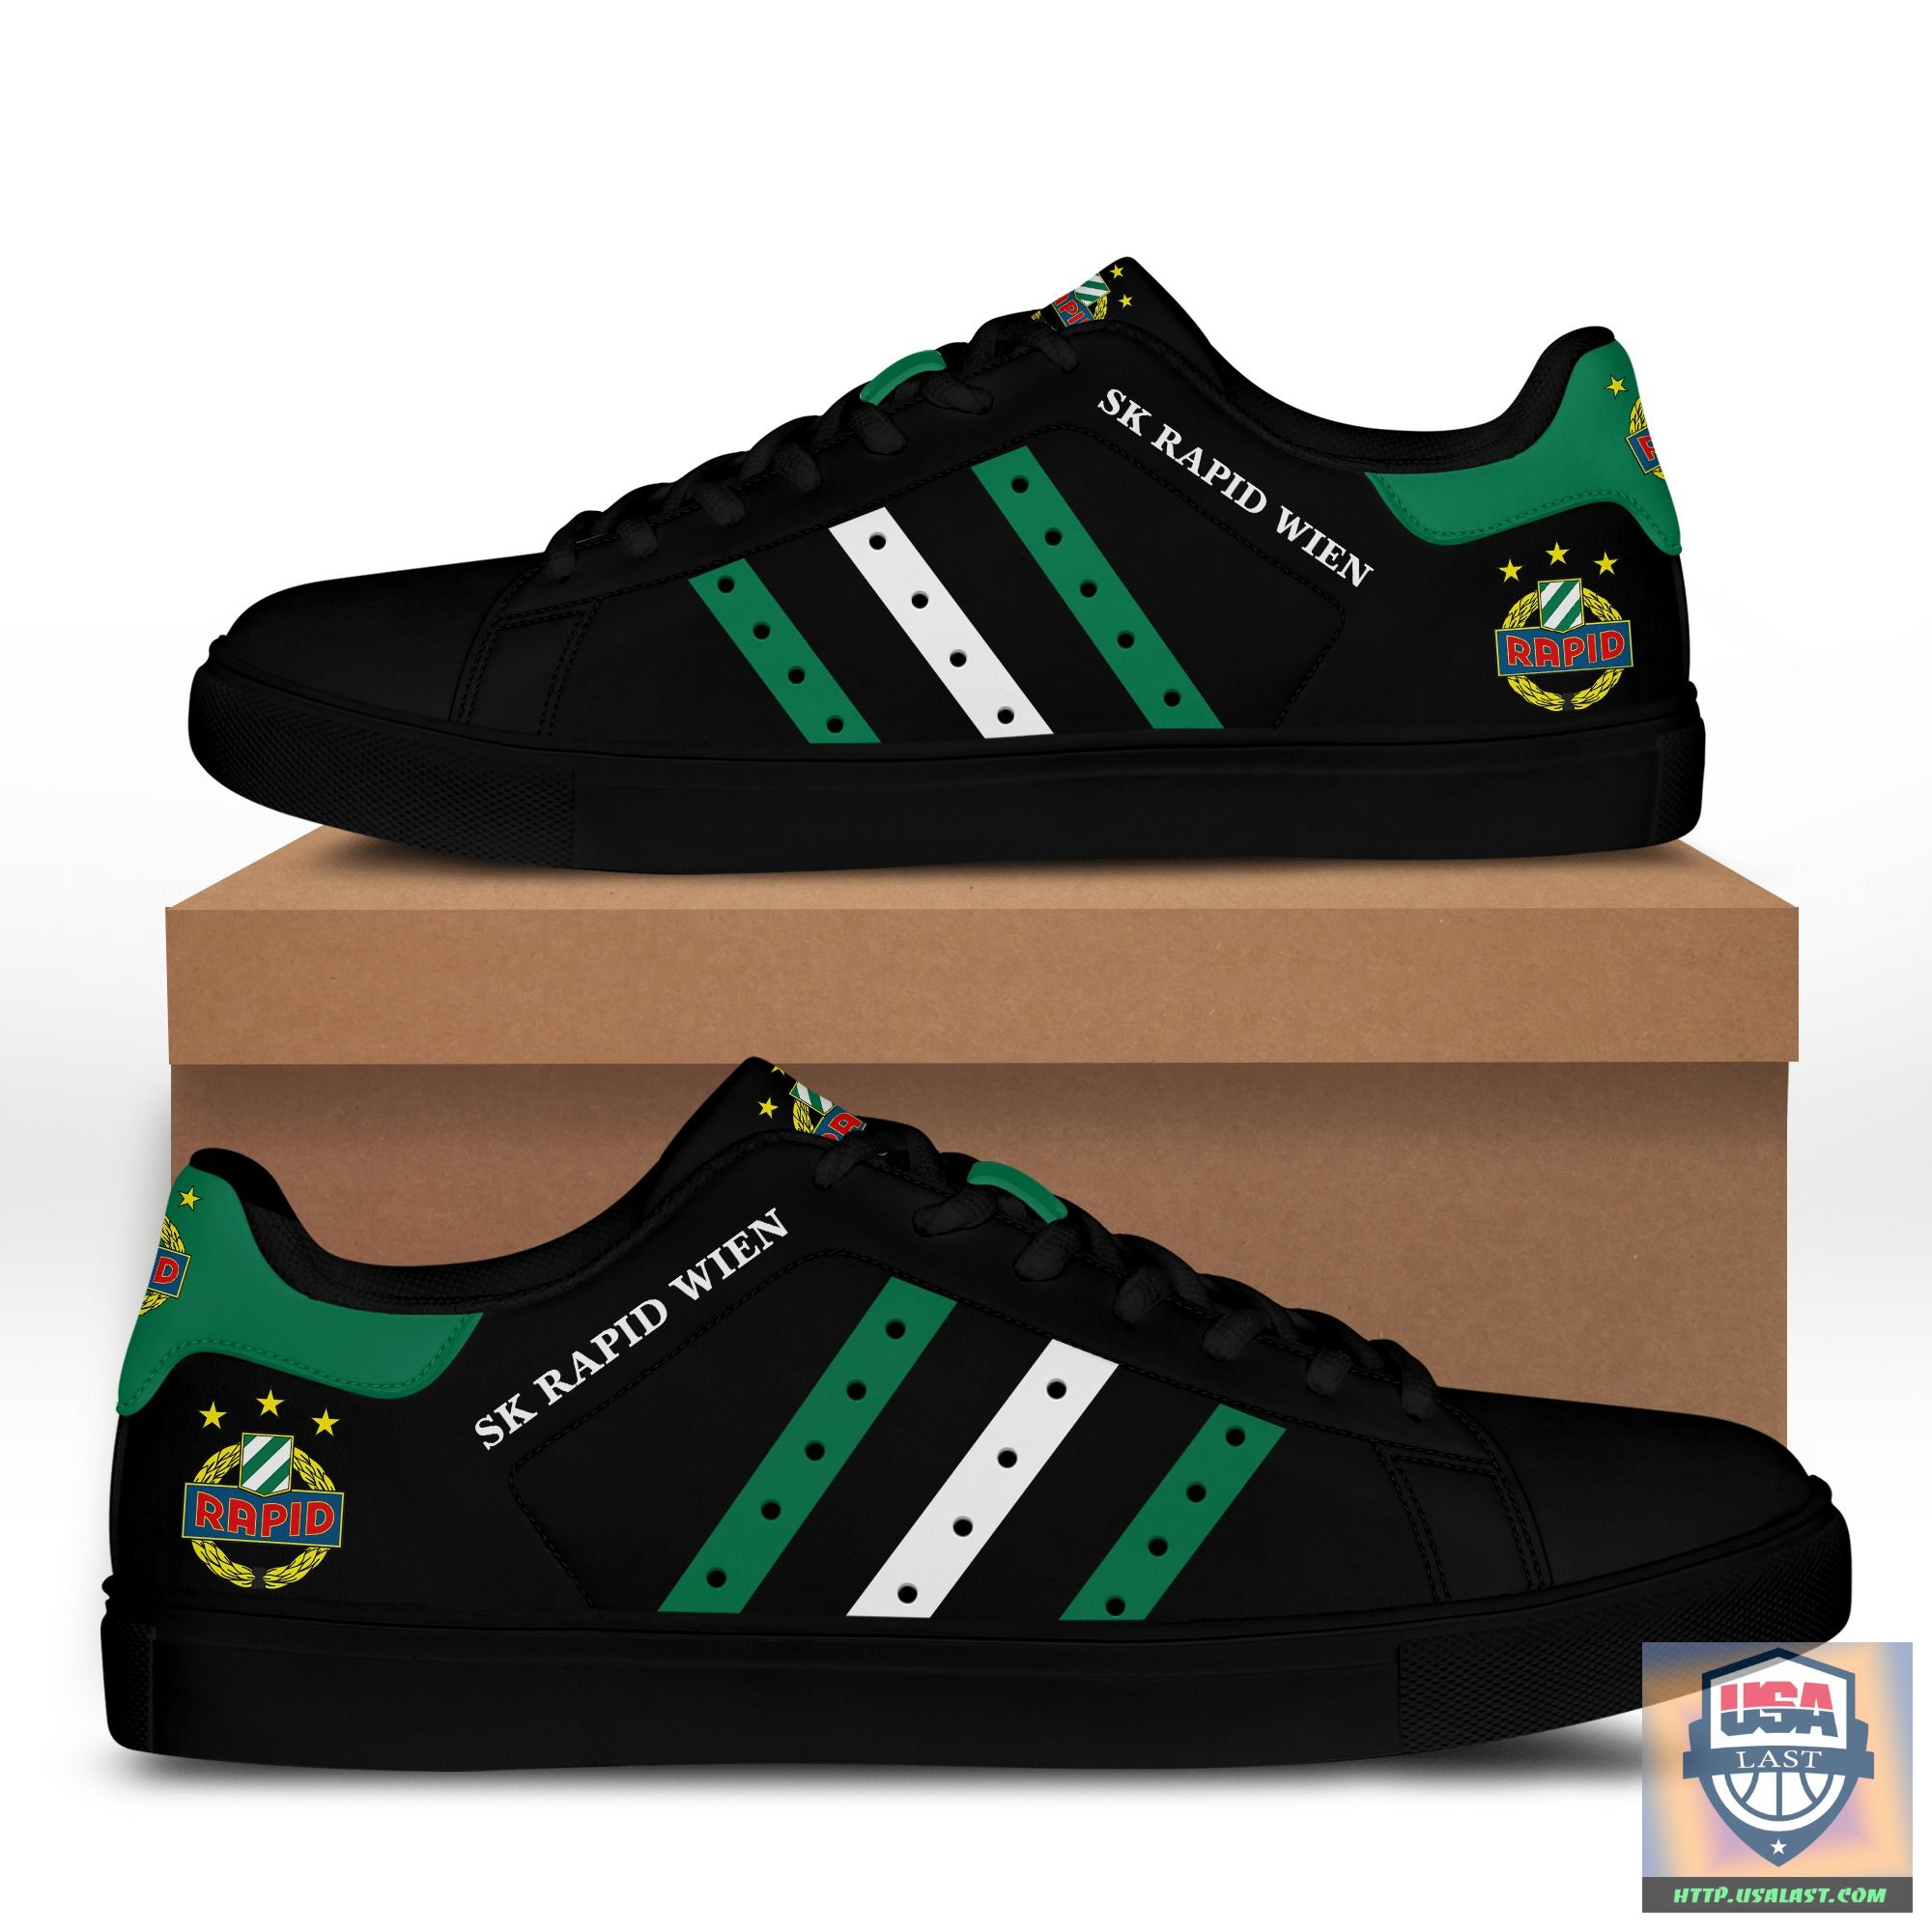 SK Rapid Wien Black Stan Smith Shoes – Red White Stripes – Usalast